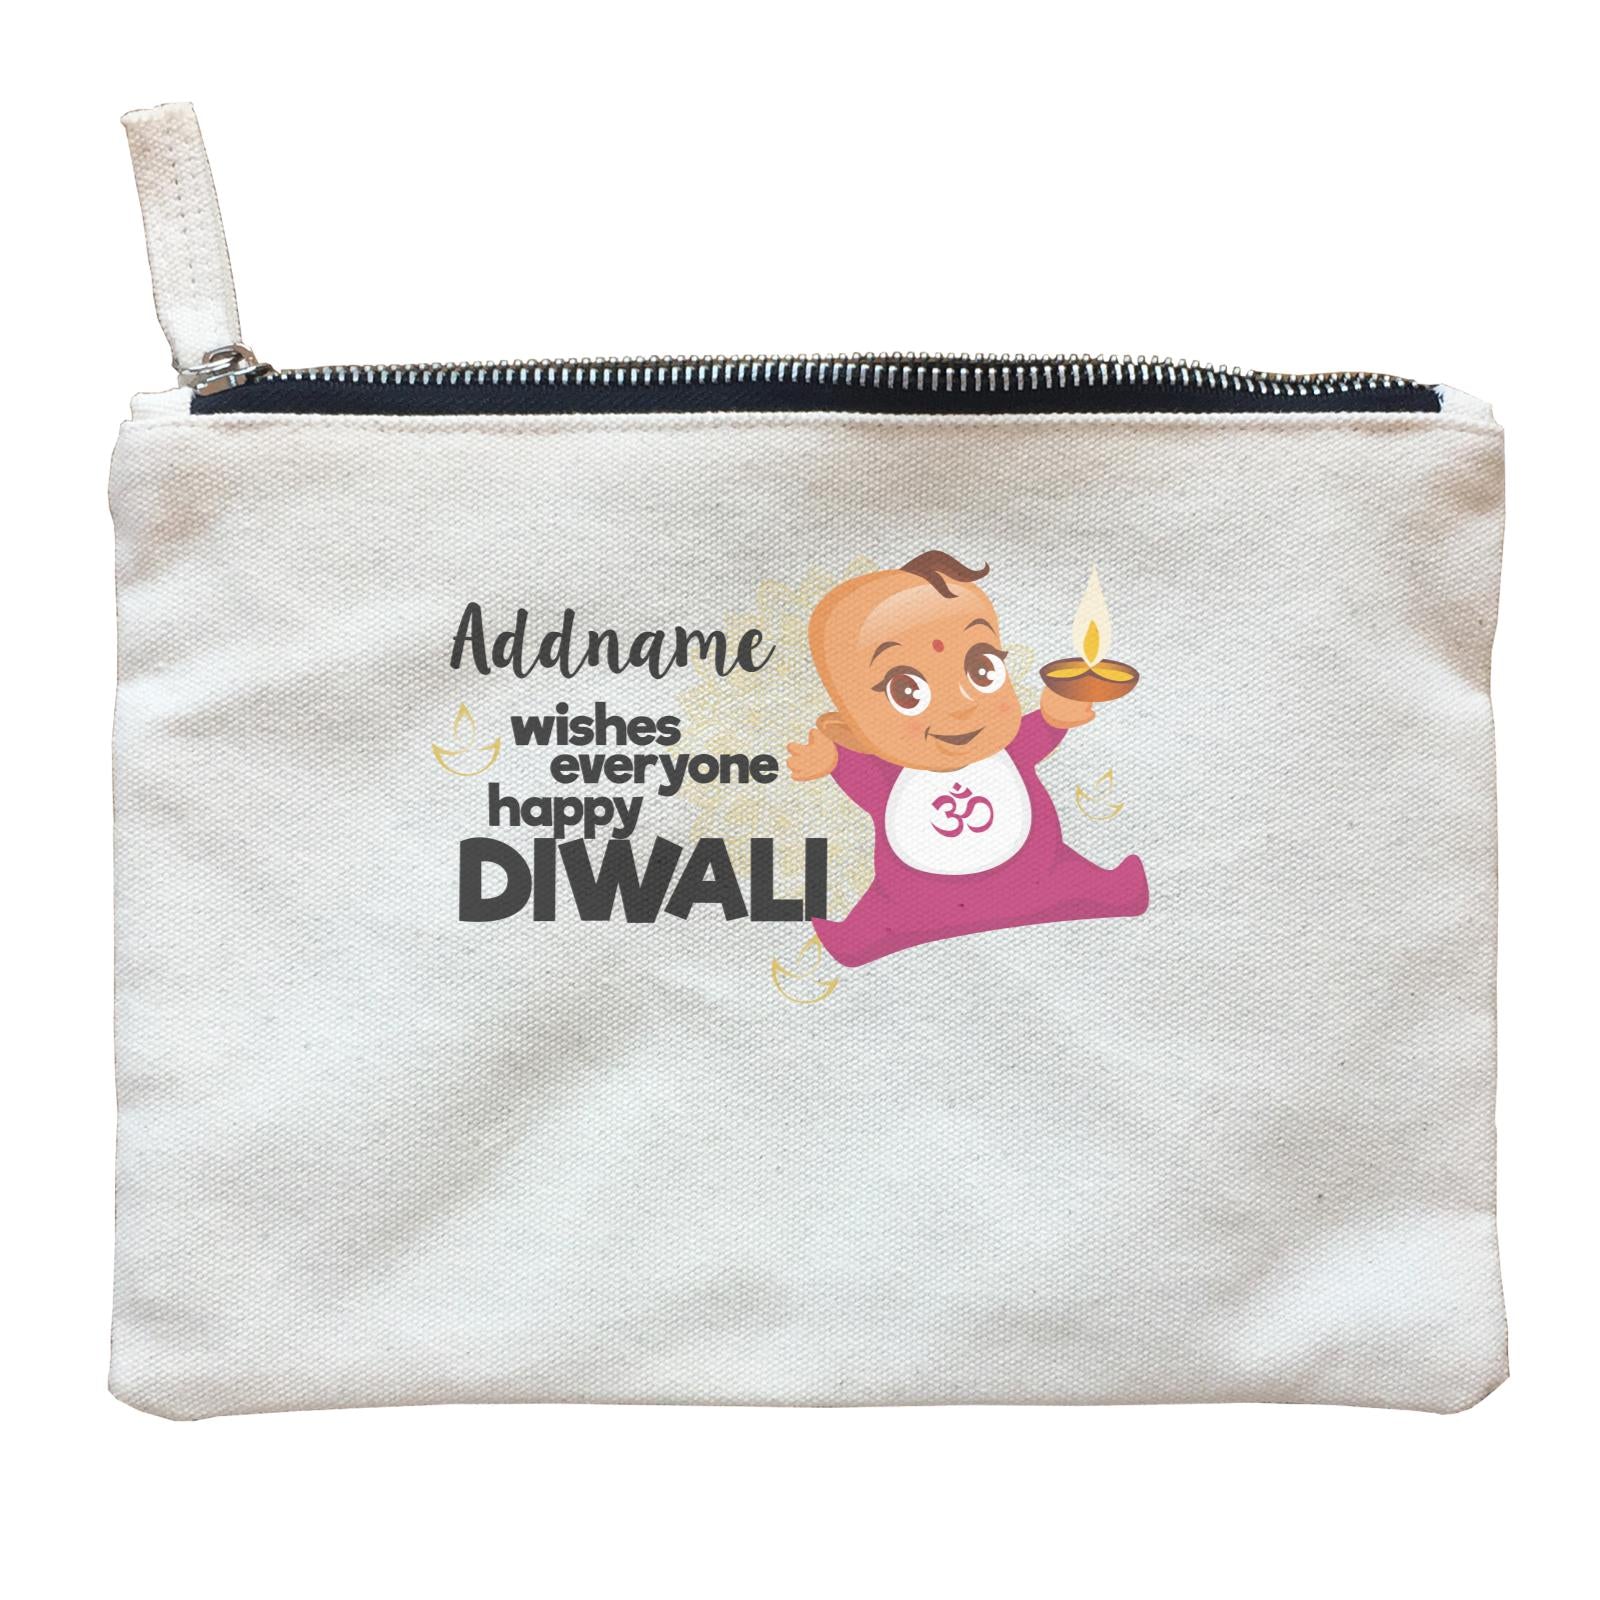 Cute Baby Wishes Everyone Happy Diwali Addname Zipper Pouch